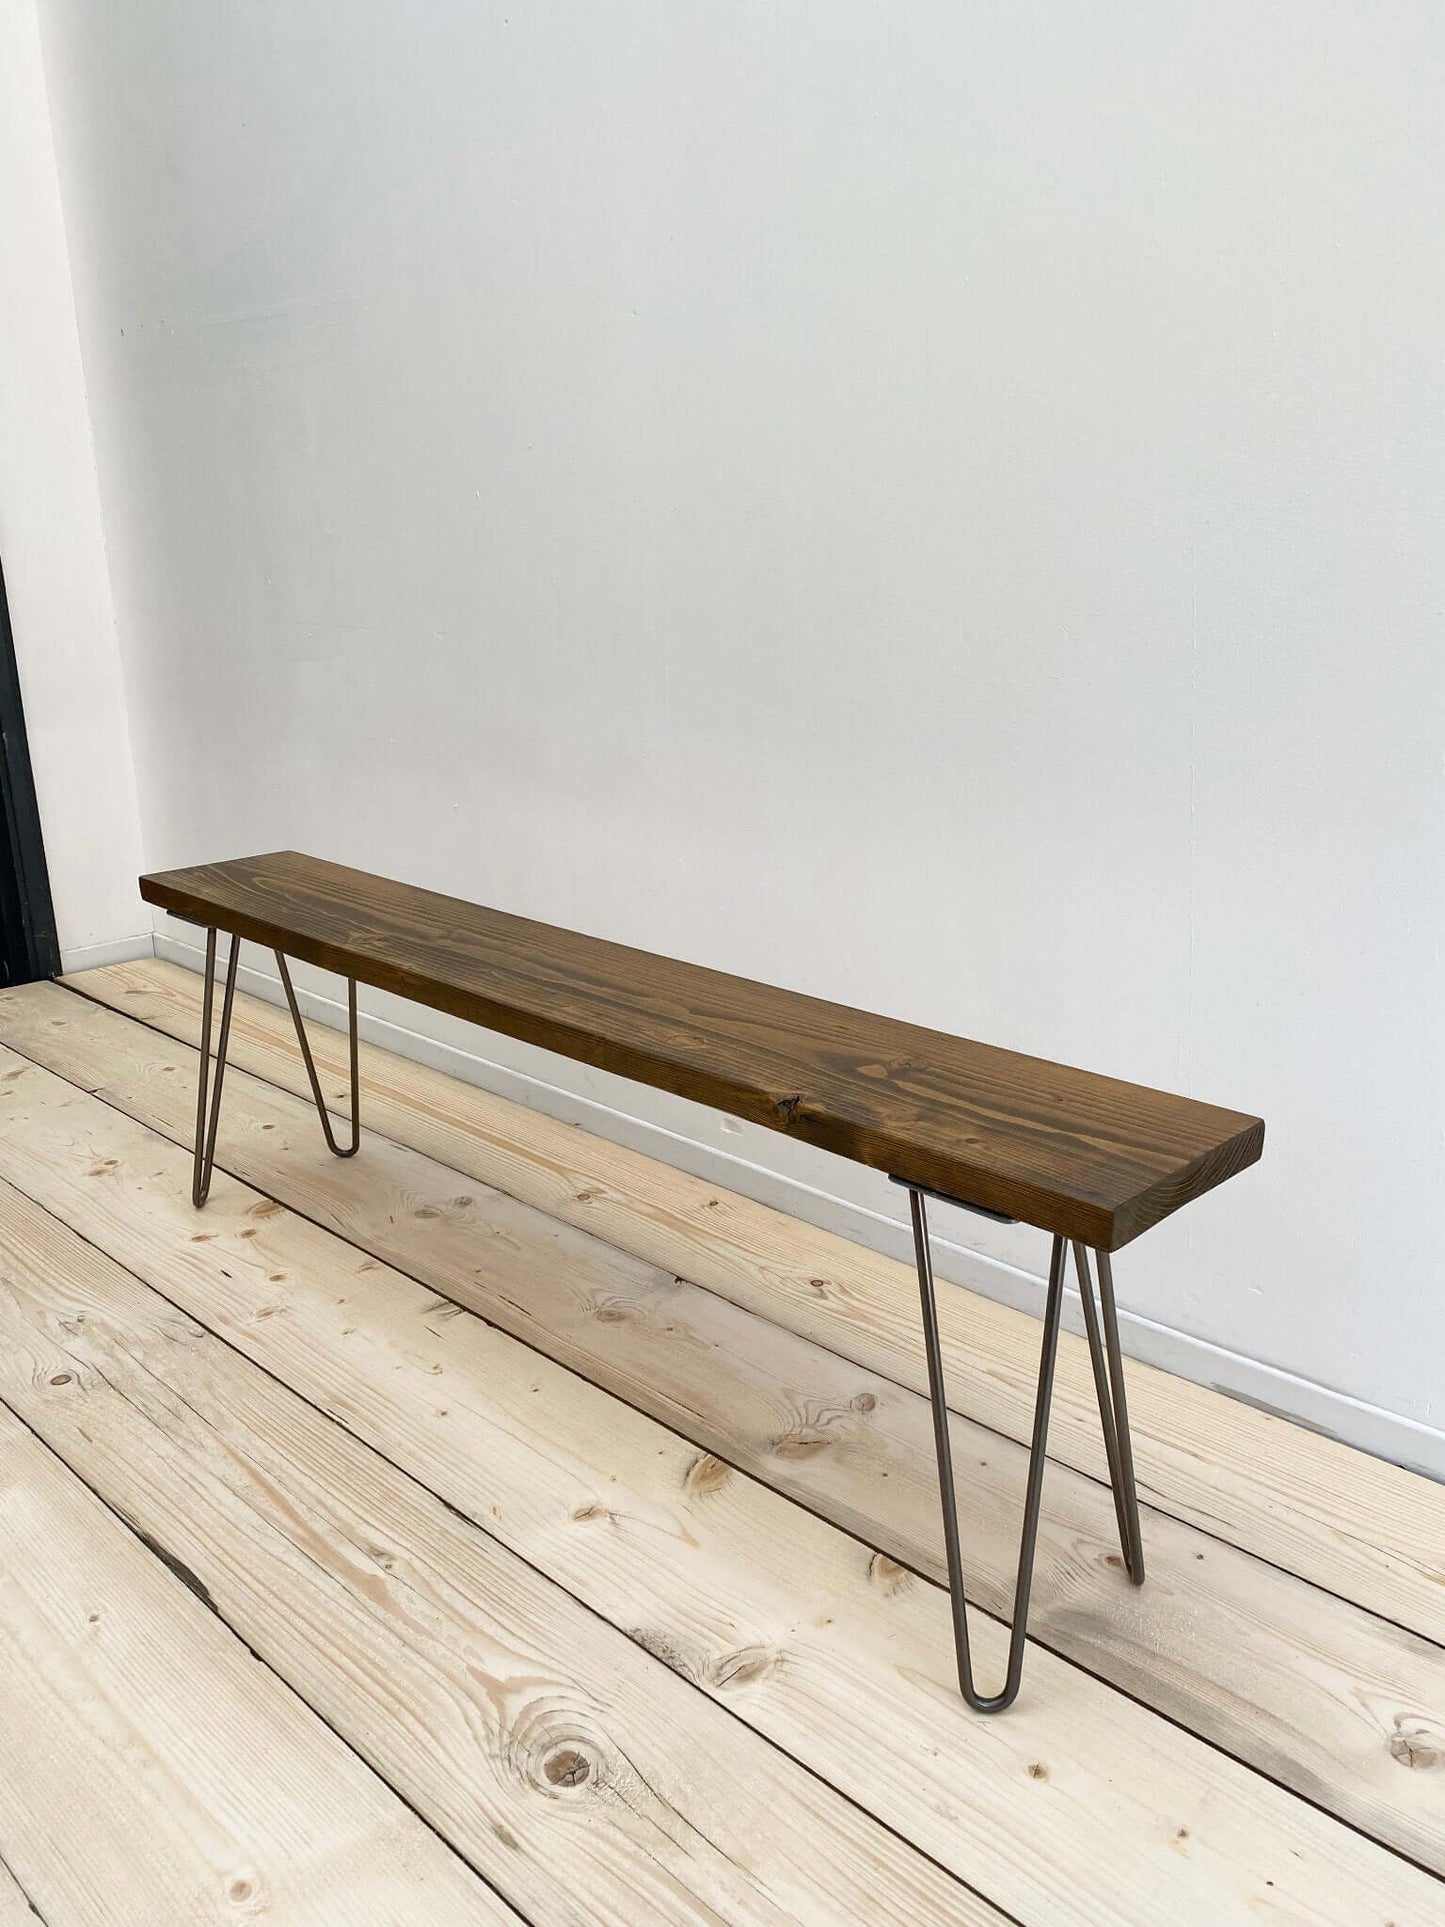 Reclaimed wood outdoor bench with hairpin legs.